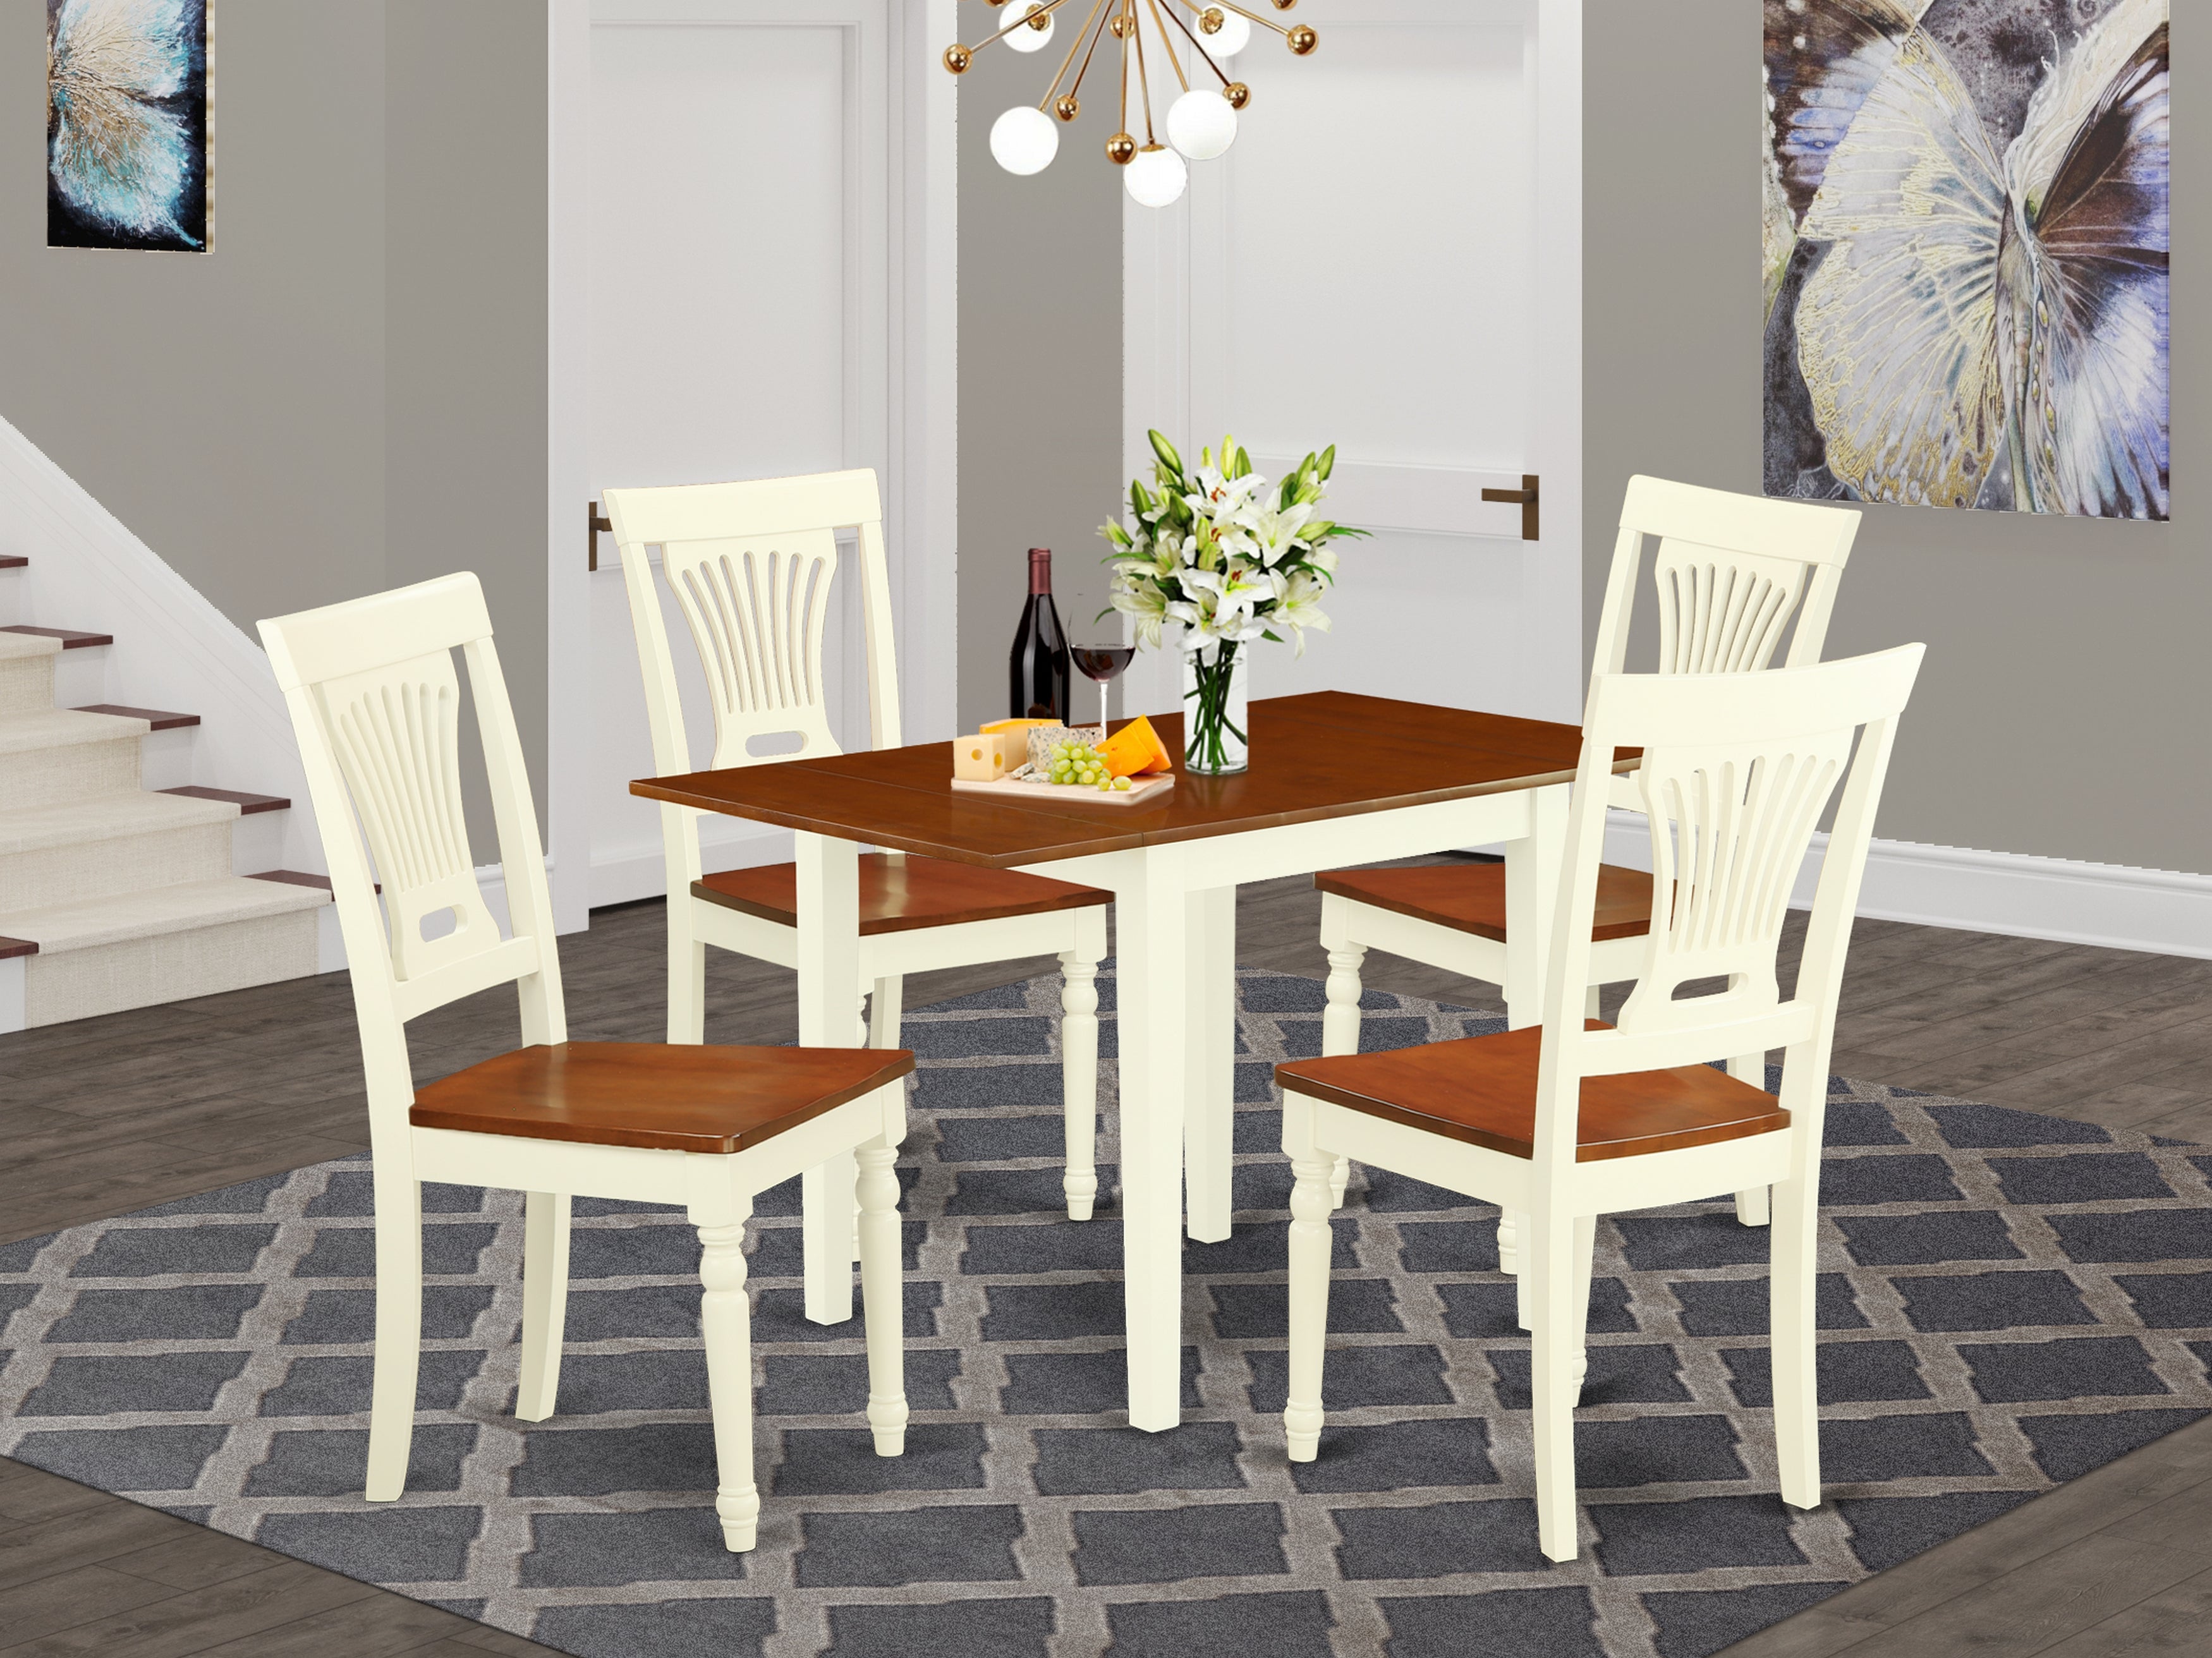 East West Furniture NDPL5-WHI-W, 5Pc Dinette Set for Small Spaces Features a Wood Dining Table and 4 Dining Room Chair with Solid Wood Seat and Panel Back, Buttermilk and Cherry Finish